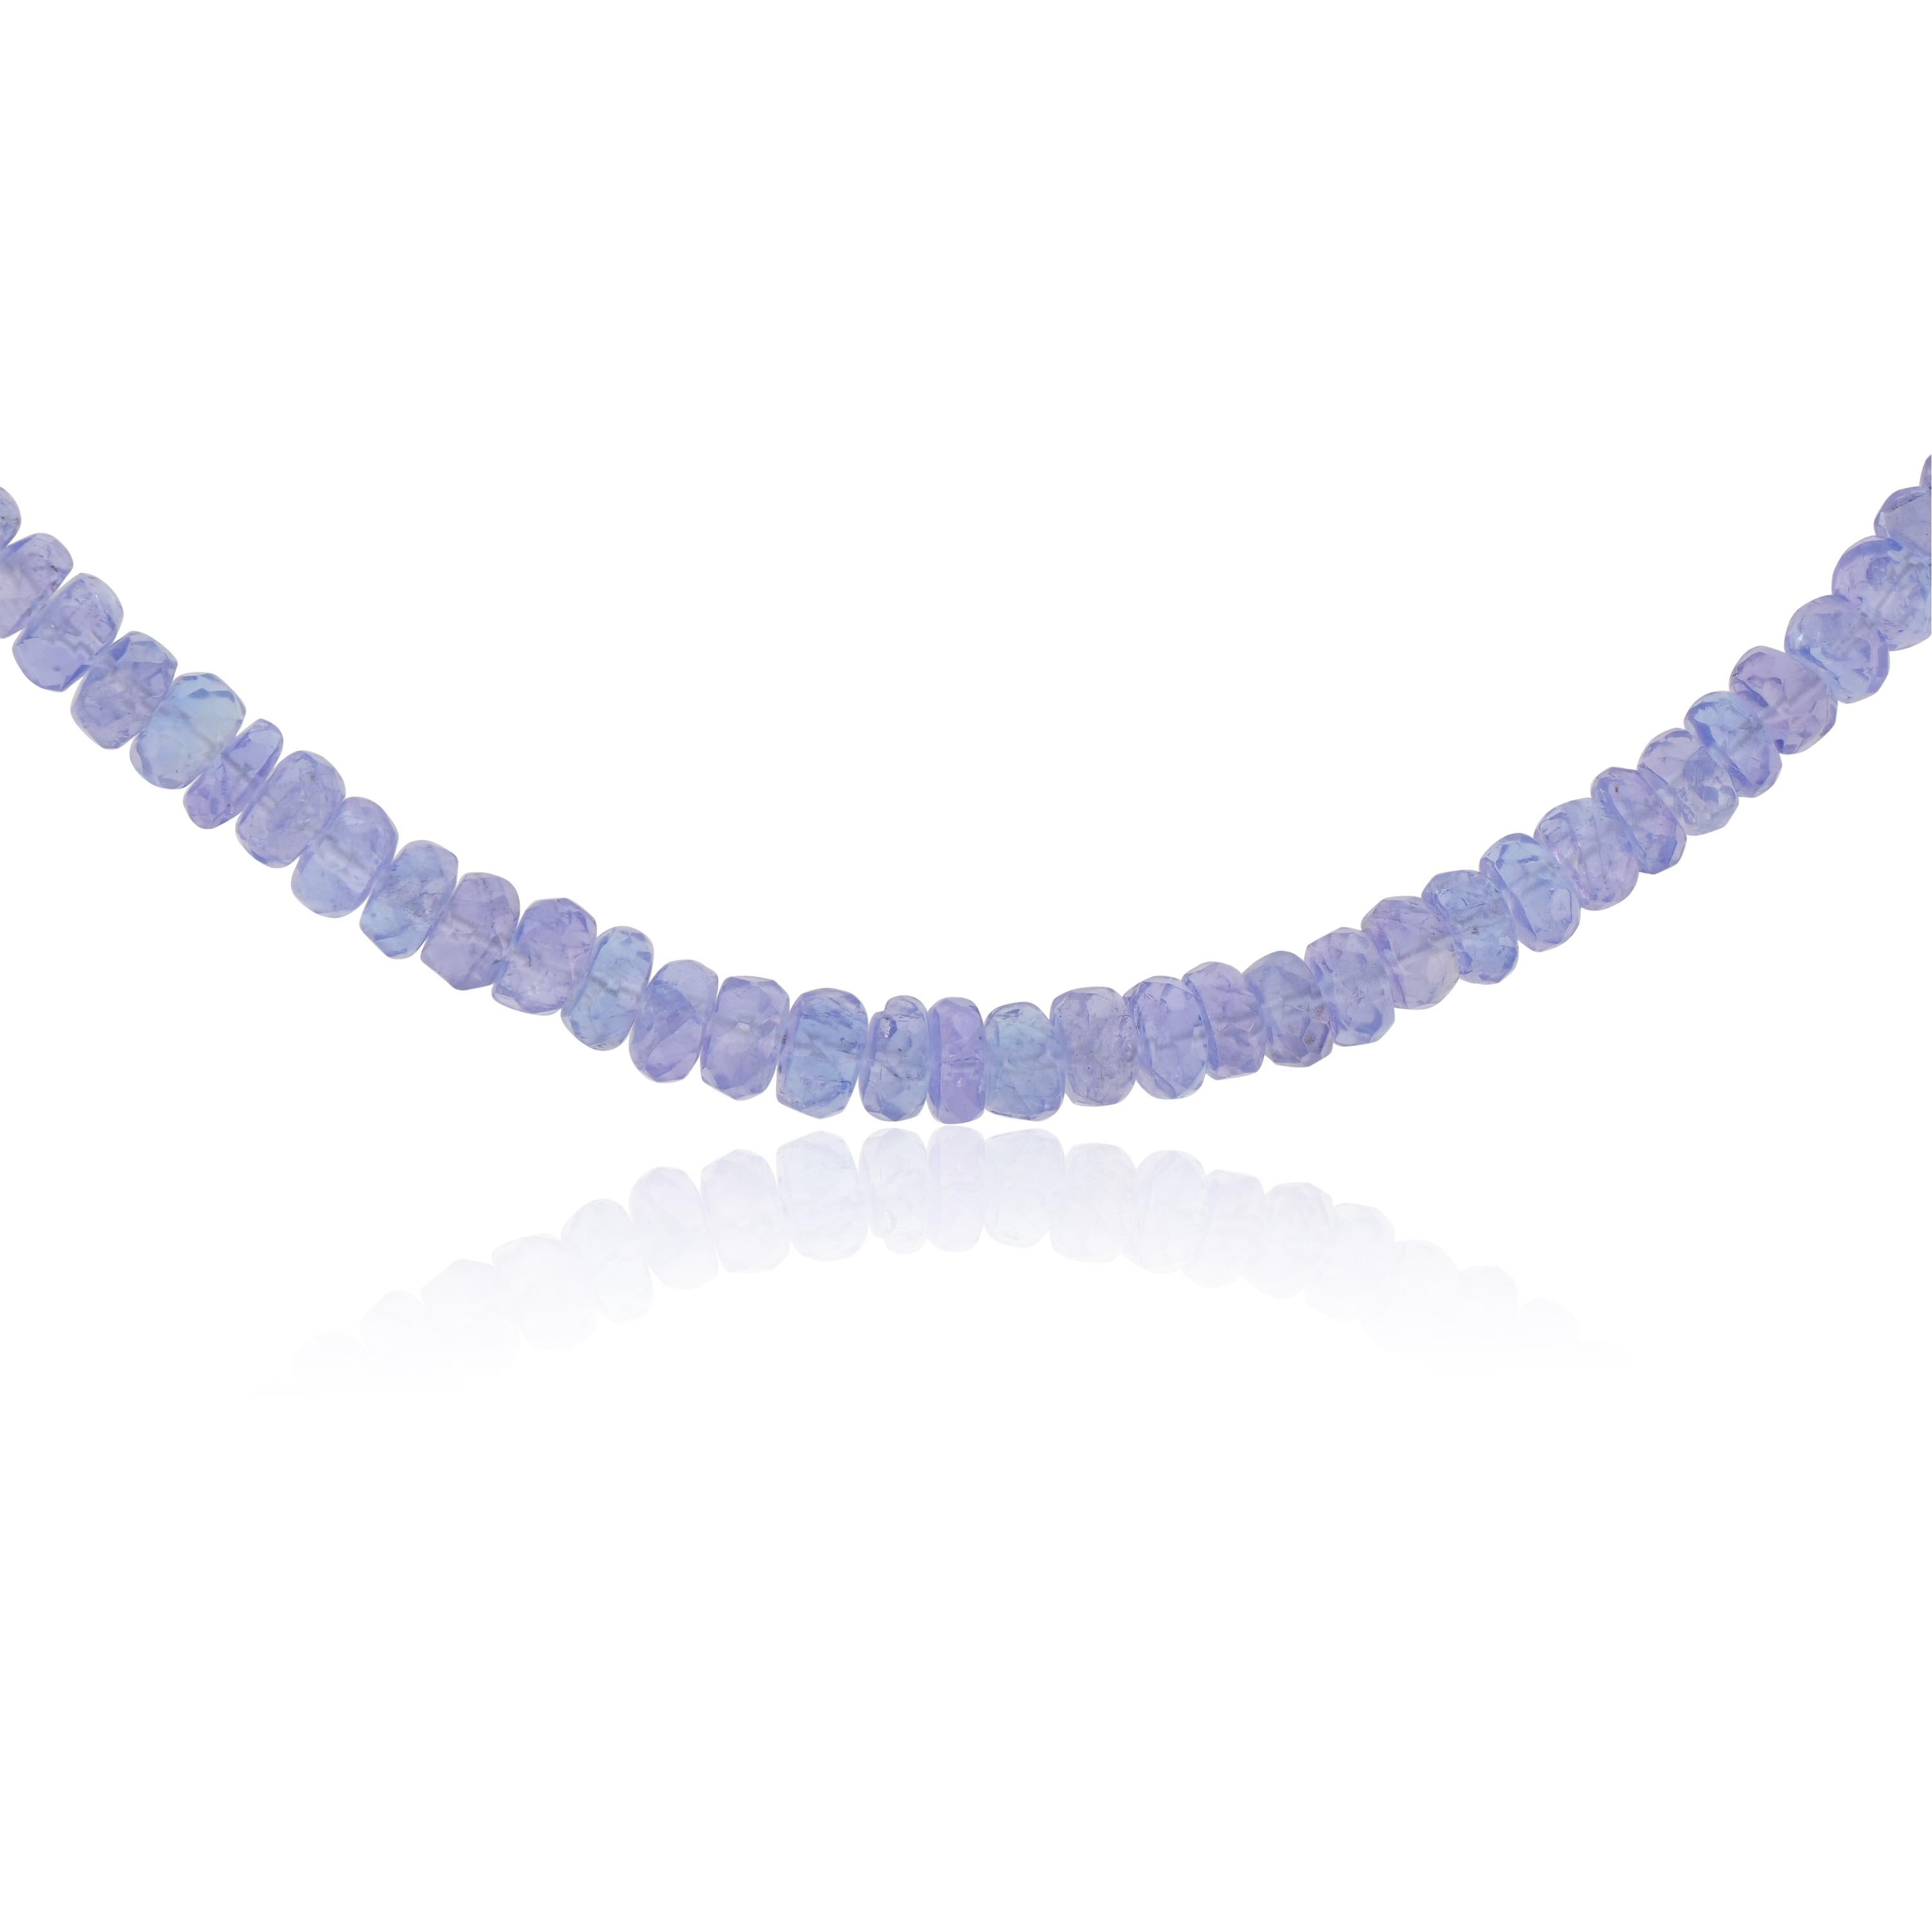 Known to be the birthstone of December, Tanzanites have such regal flair. Featured with 56.57Ct  in round faceted beads is set in genuine 925 sterling silver and is nickel free. This women's necklace has a hanging length is 18 inches.